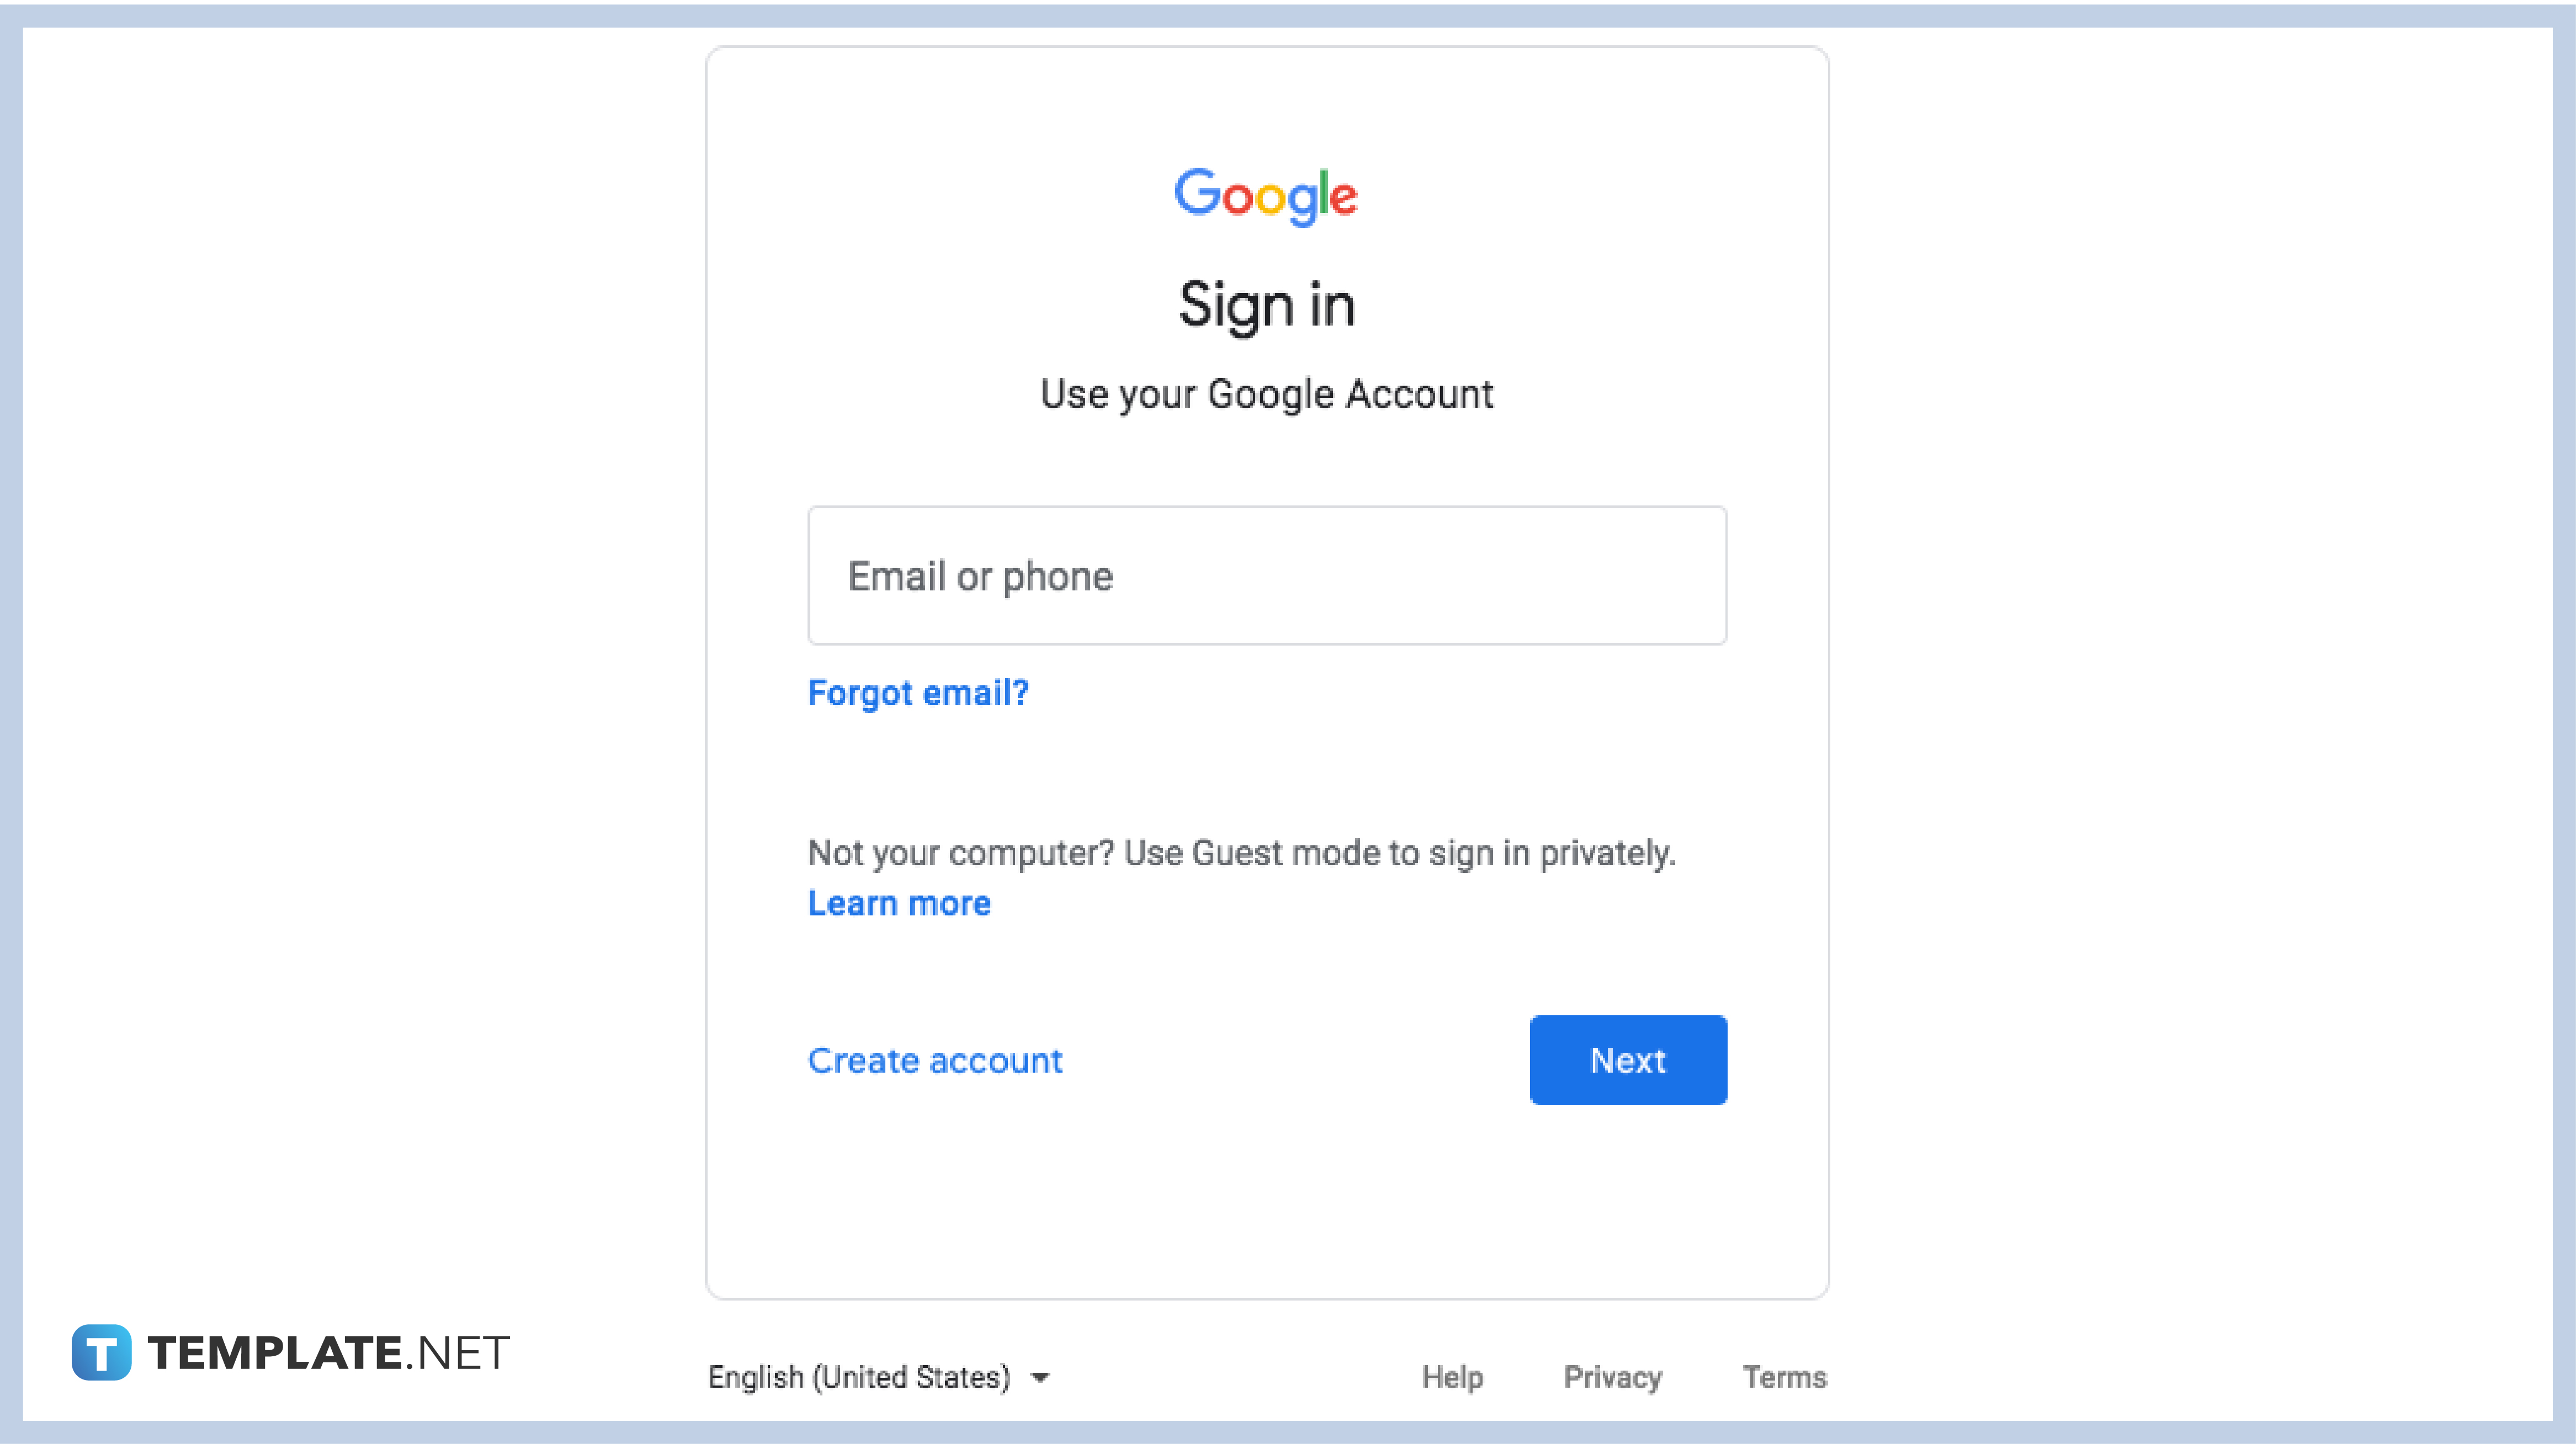 step-1-sign-in-to-your-google-account-012